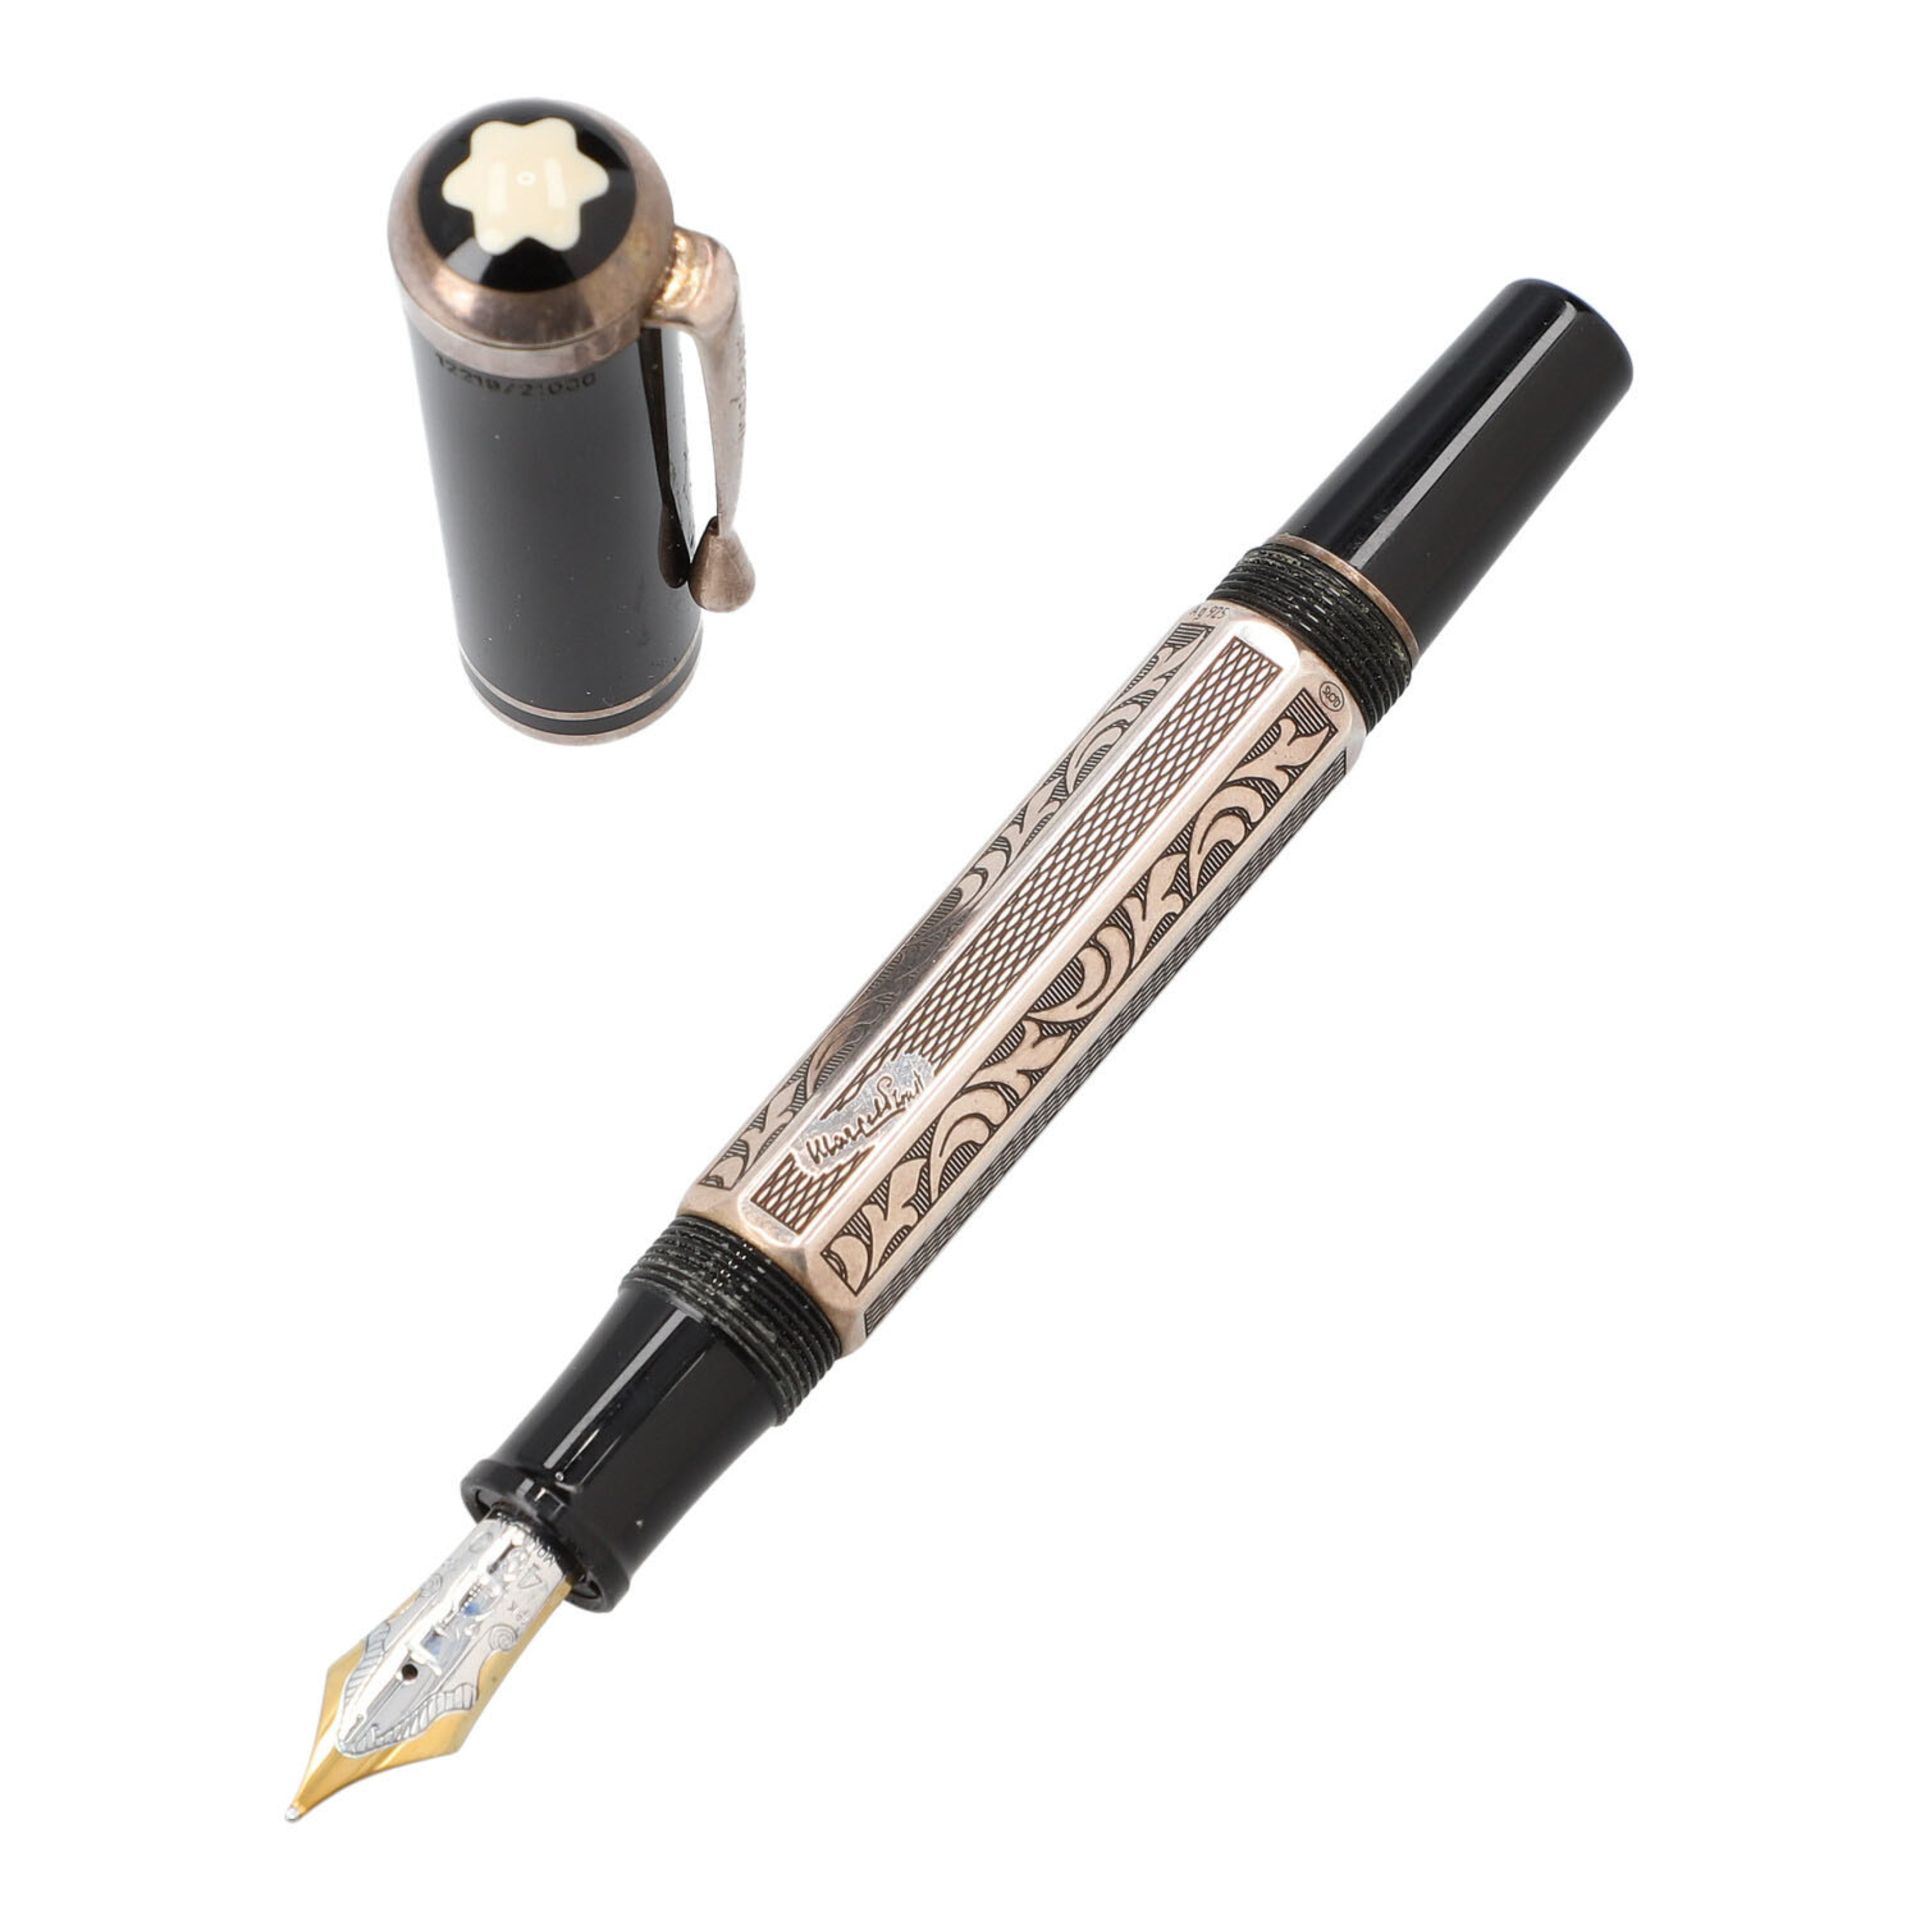 MONTBLANC Füllfederhalter "WRITERS EDITION MARCEL PROUST", Koll.: 1999. - Image 3 of 4